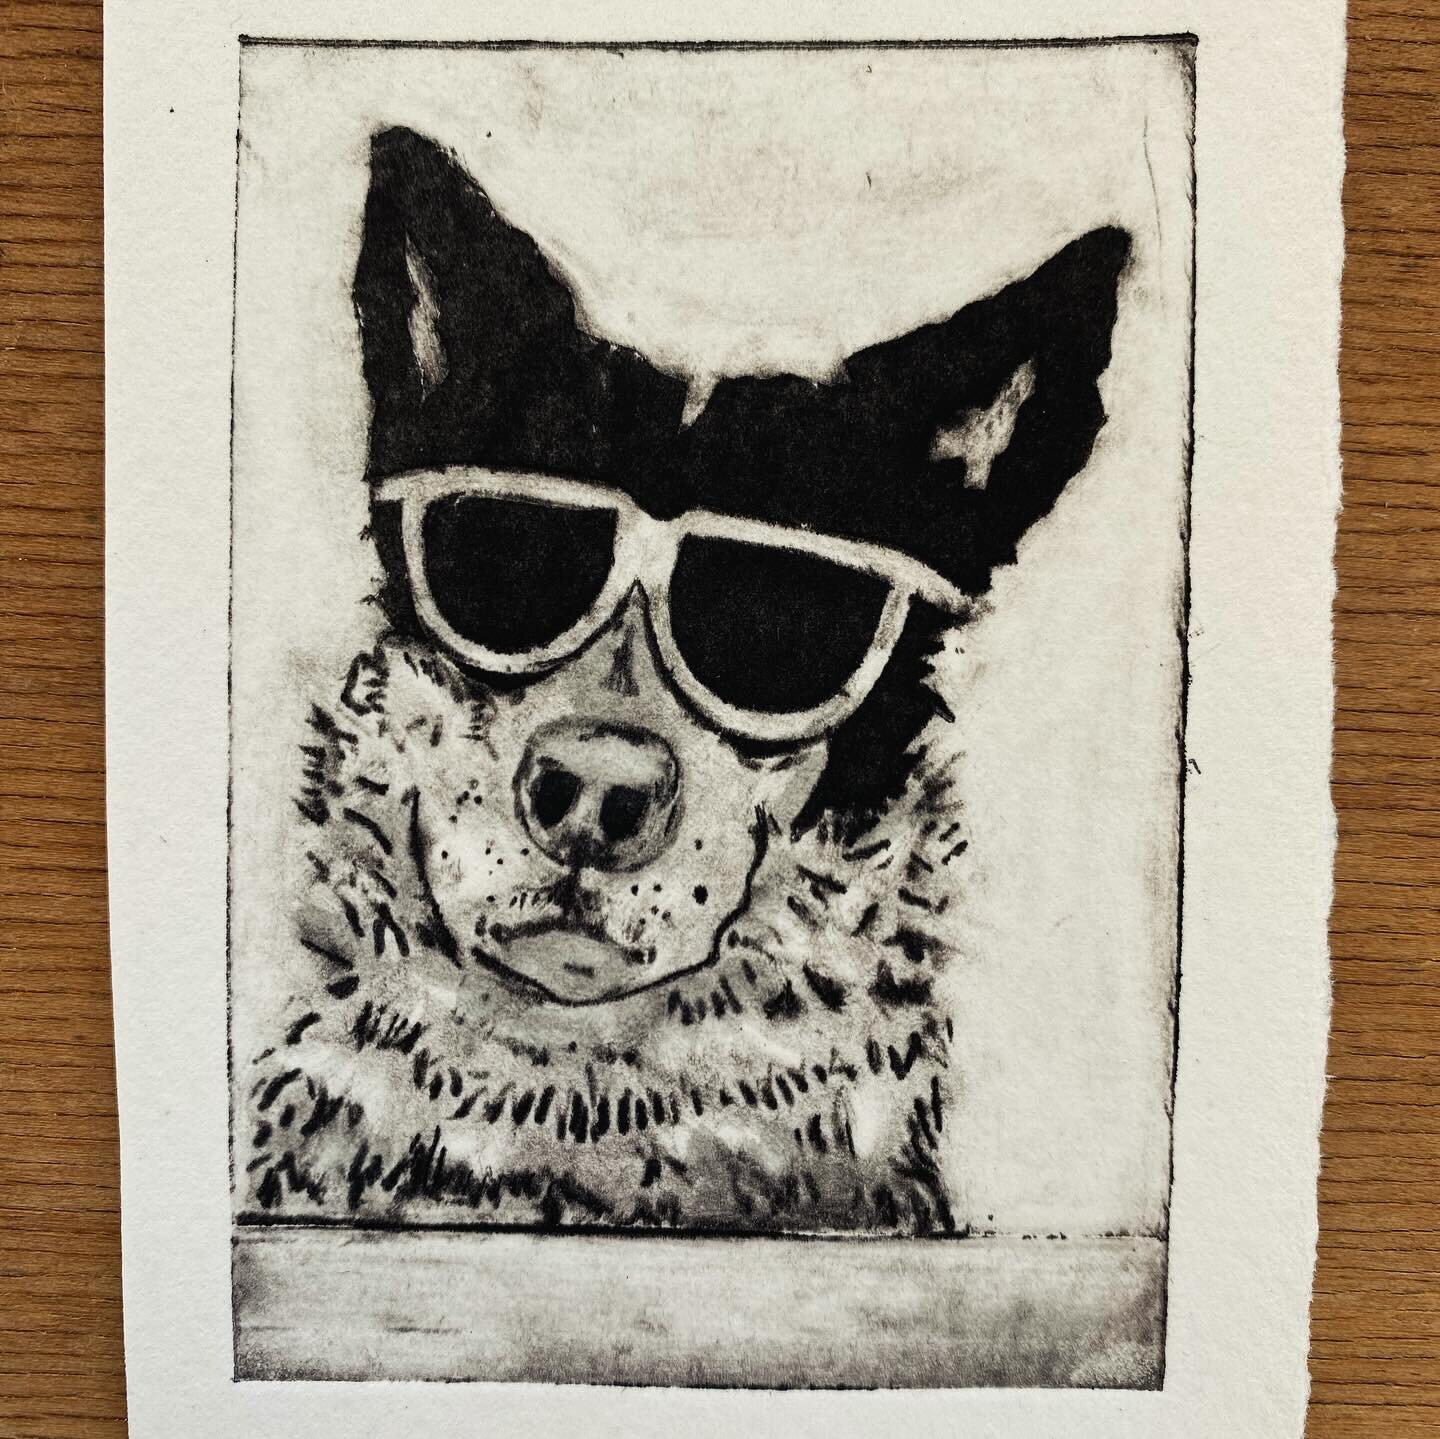 ❤️ more etching fun! 
I remember one Australia Day we put sunglasses on a very young Heidi the Kelpie. She was pretty funny trying to work it out. I can just imagine the same expression on this guy behind those frames! 
#tetrapaketching #tetrapackpri